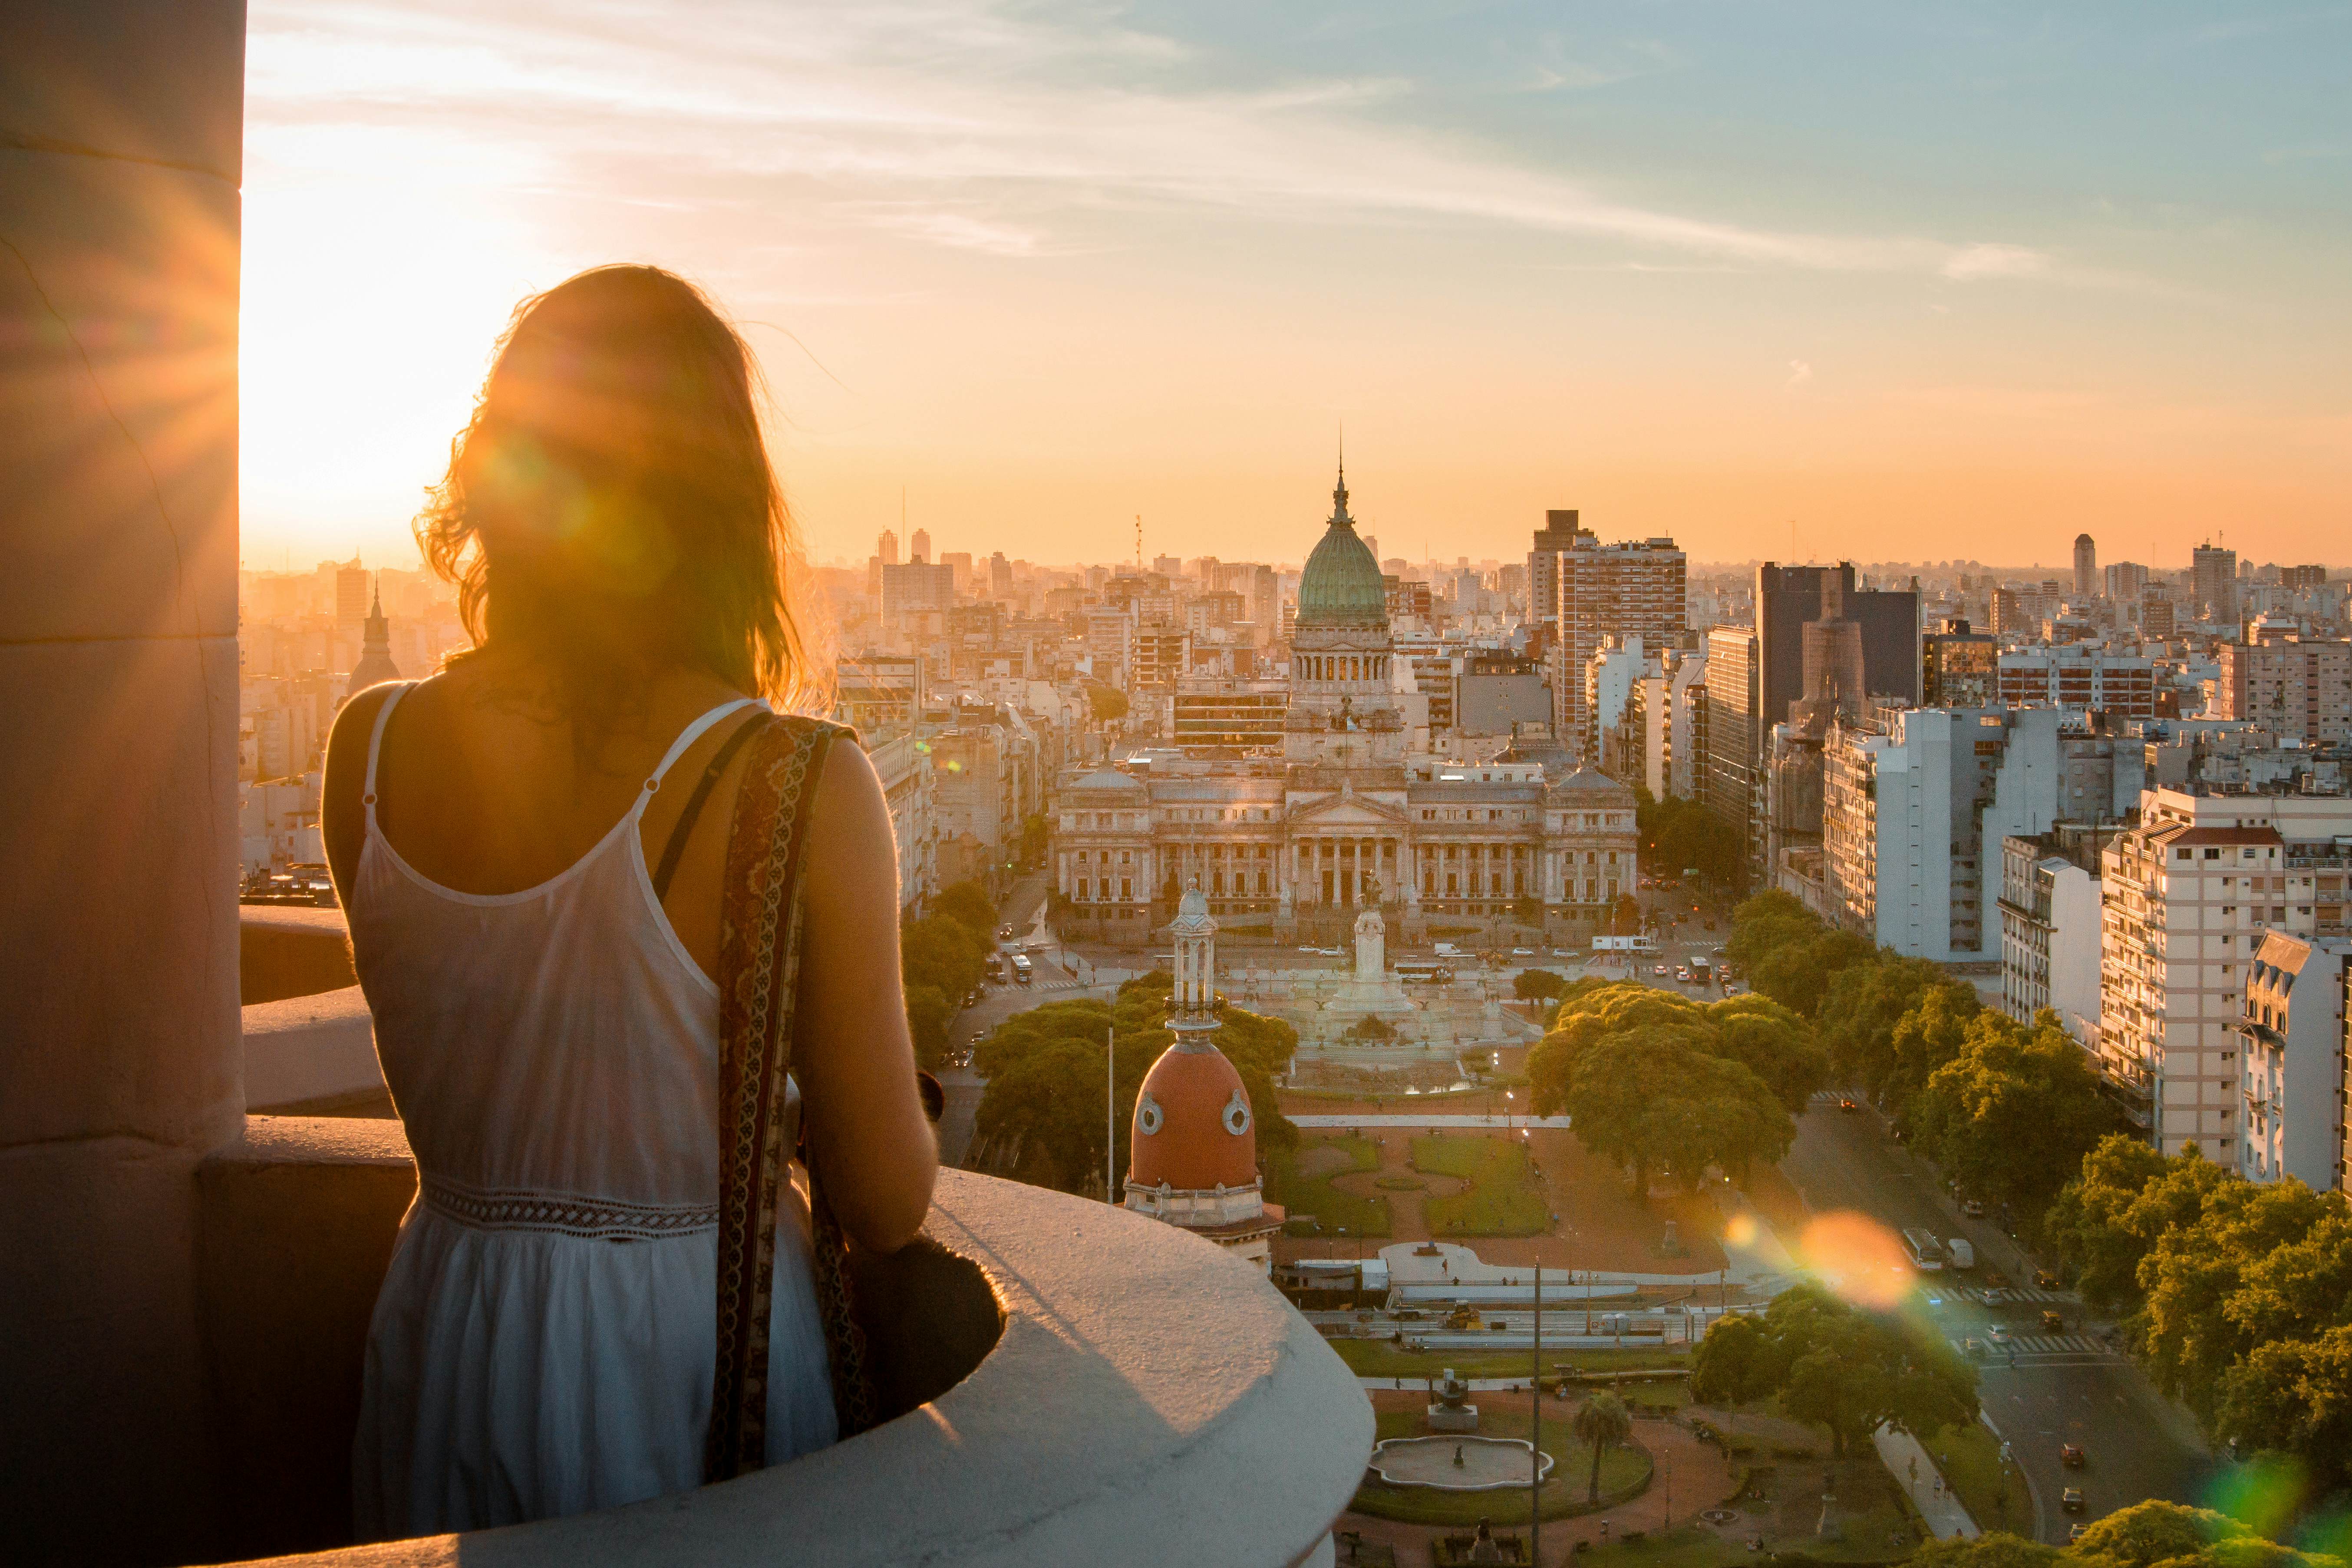 Full Digital Nomad Guide to Buenos Aires, Argentina